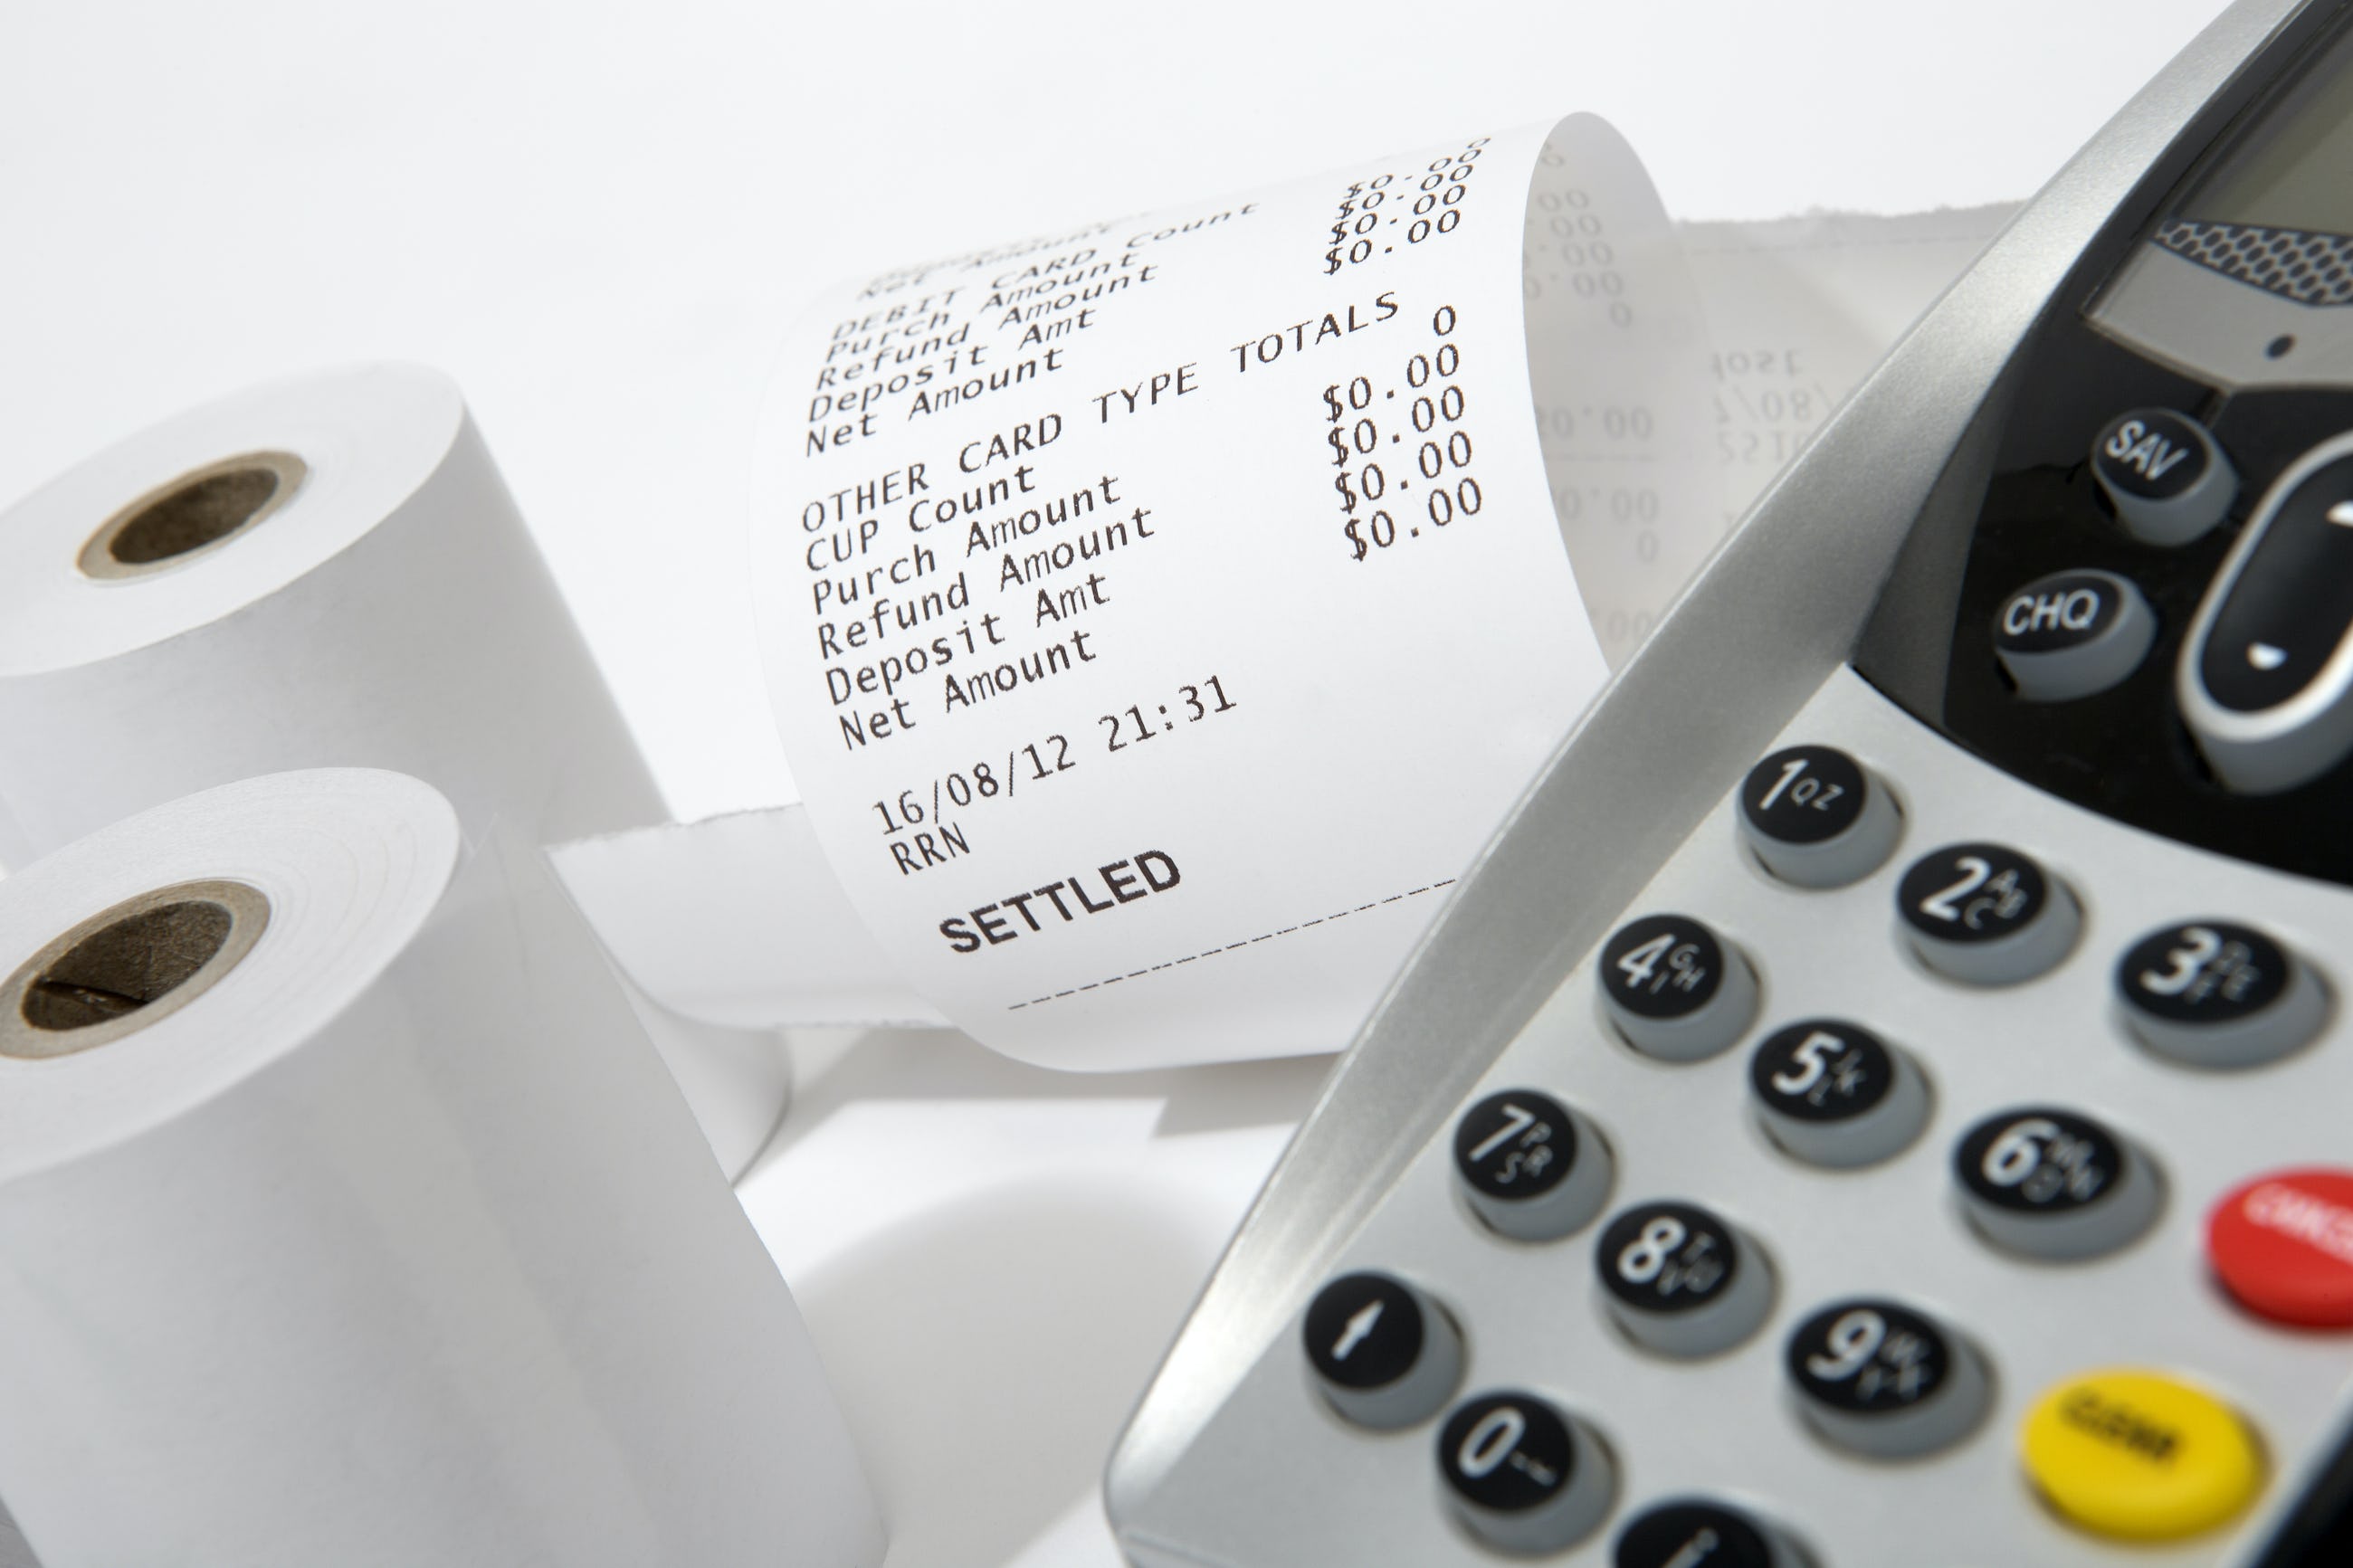 Cold knowledge: why should thermal paper fade, how to buy good quality thermal paper